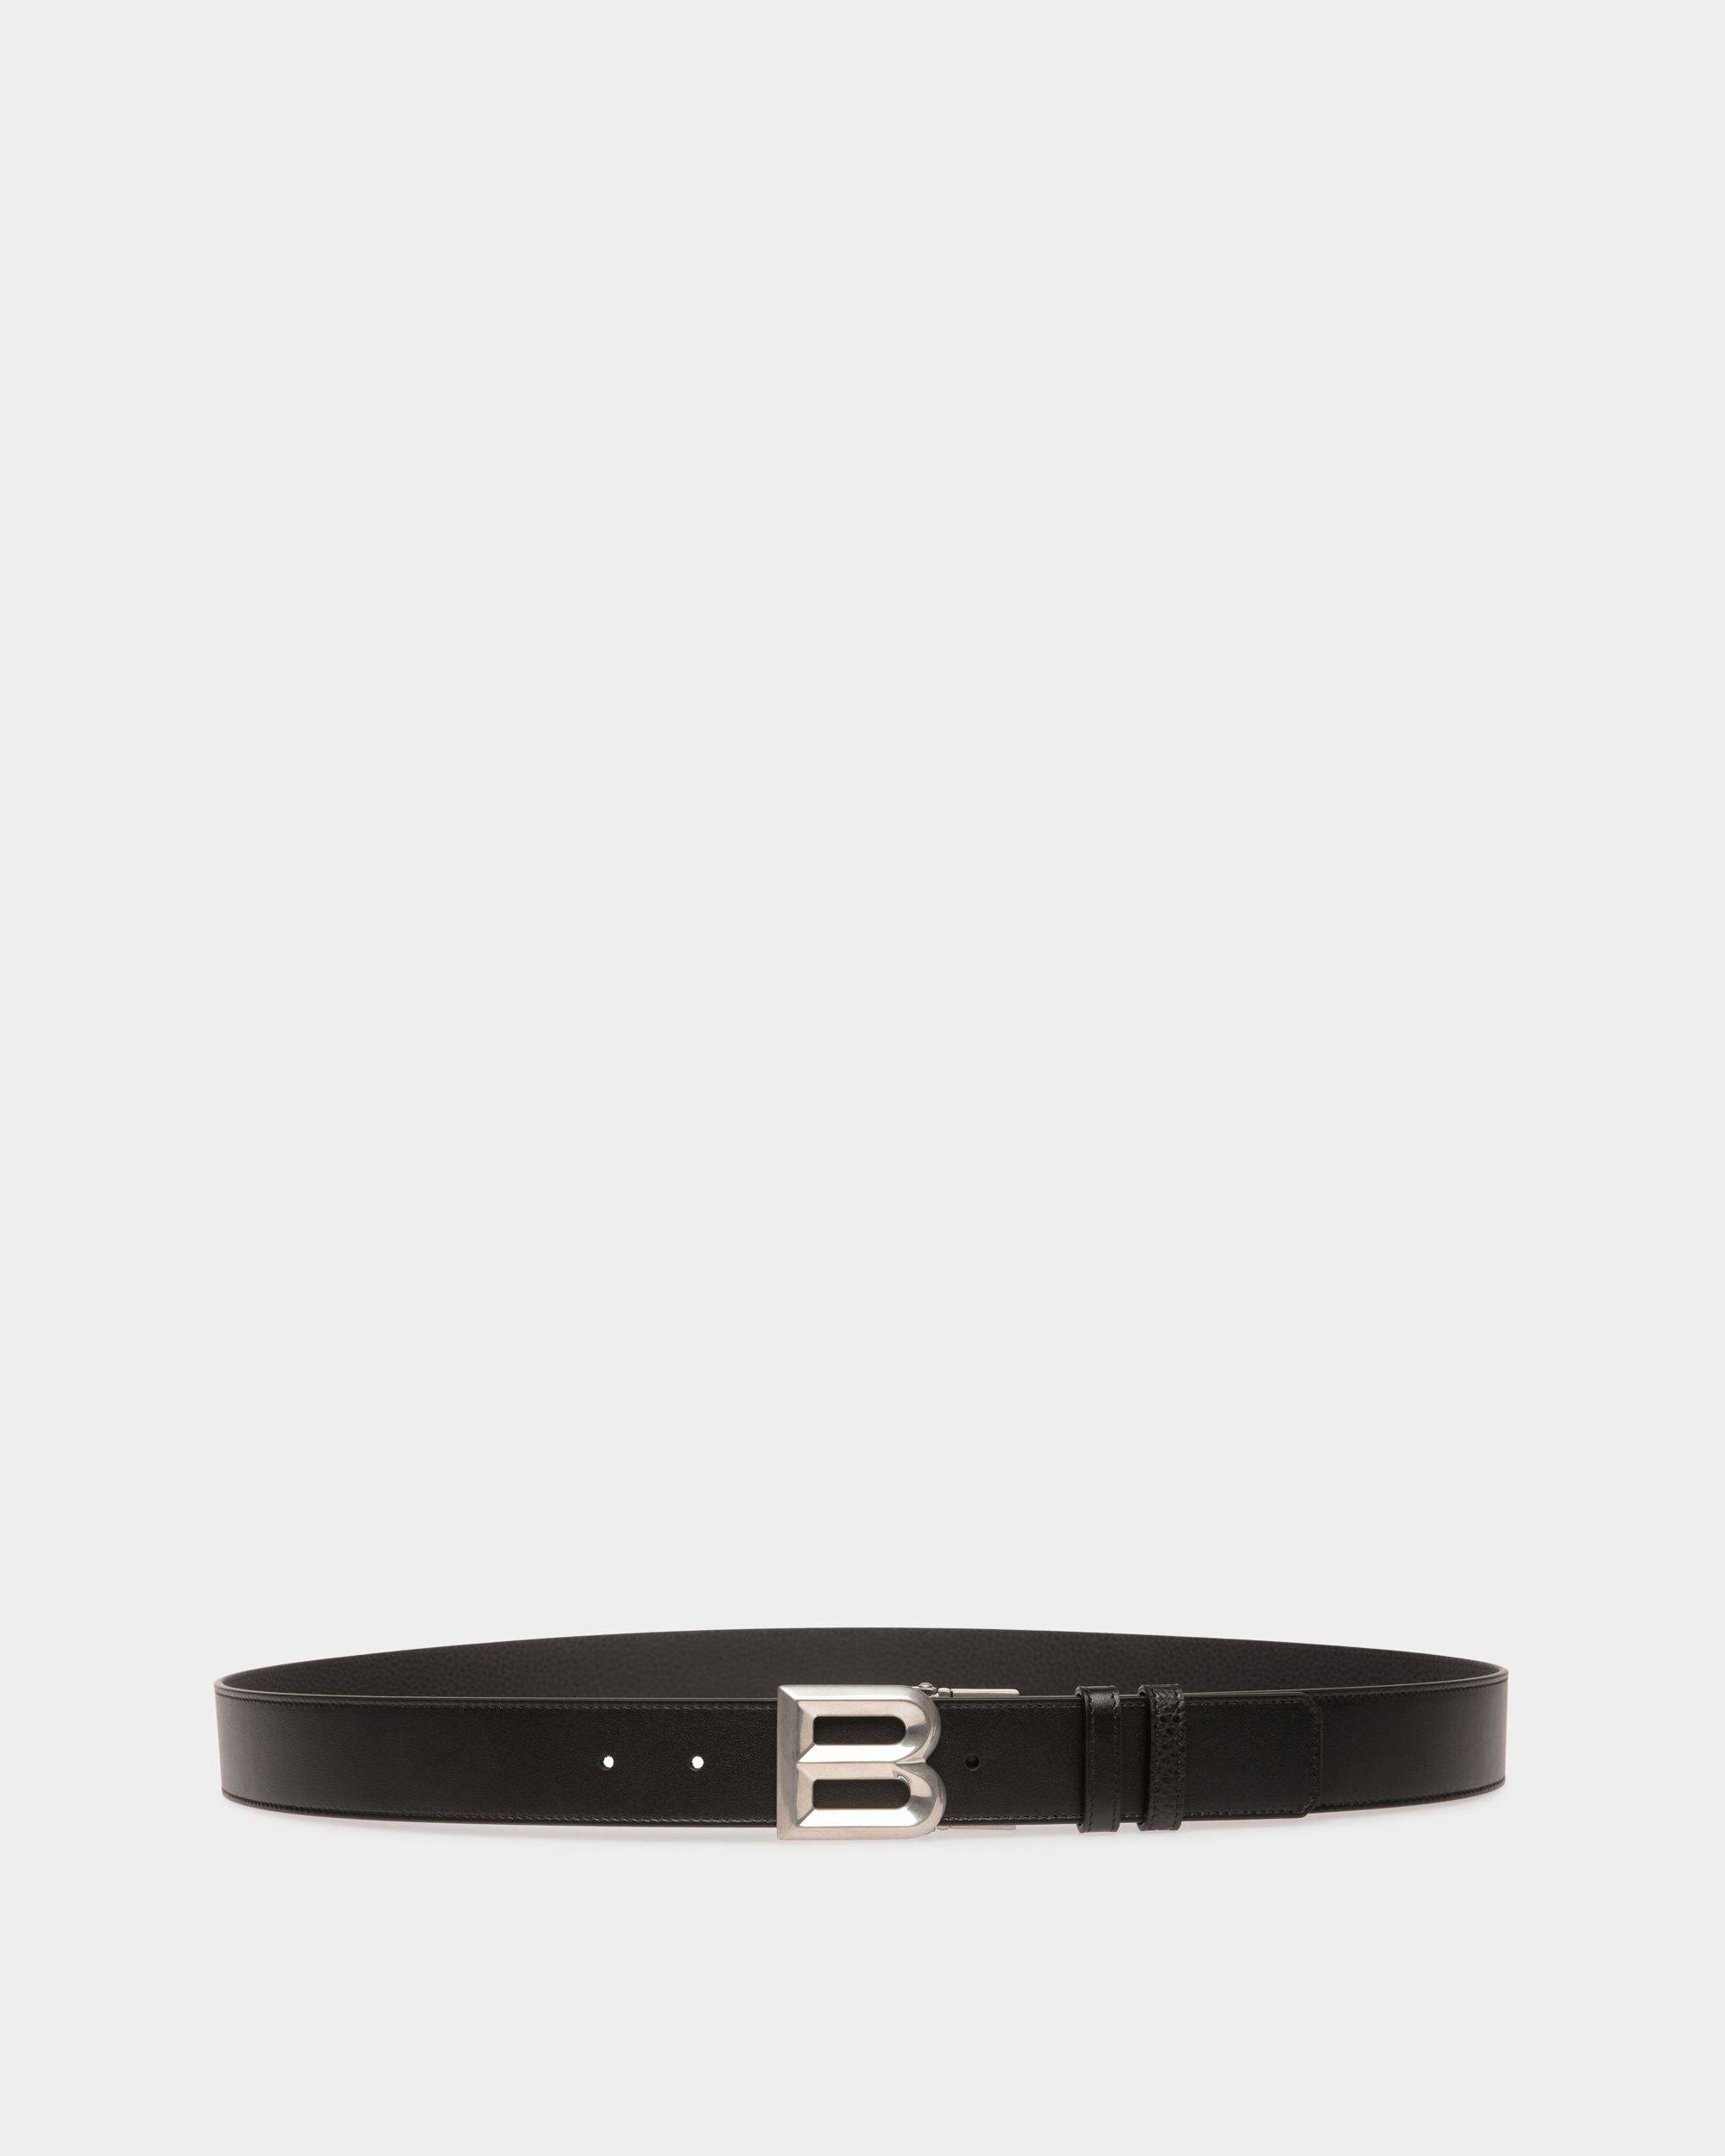 B Bold 35mm | Men's Reversible And Adjustable Belt in Black Leather | Bally | Still Life Front